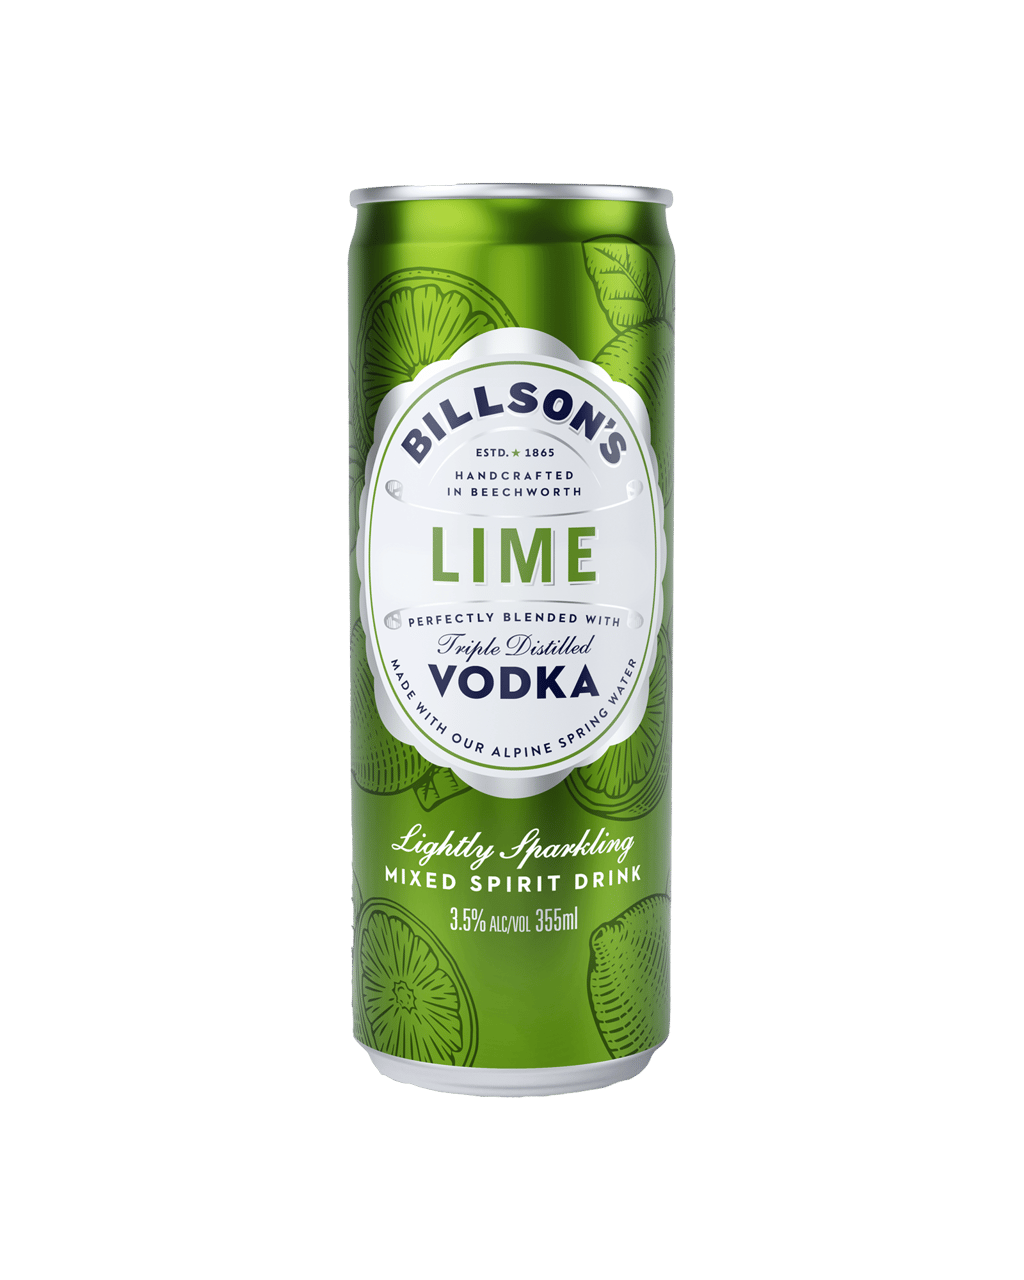 Image - Vodka with Lime by Billson's